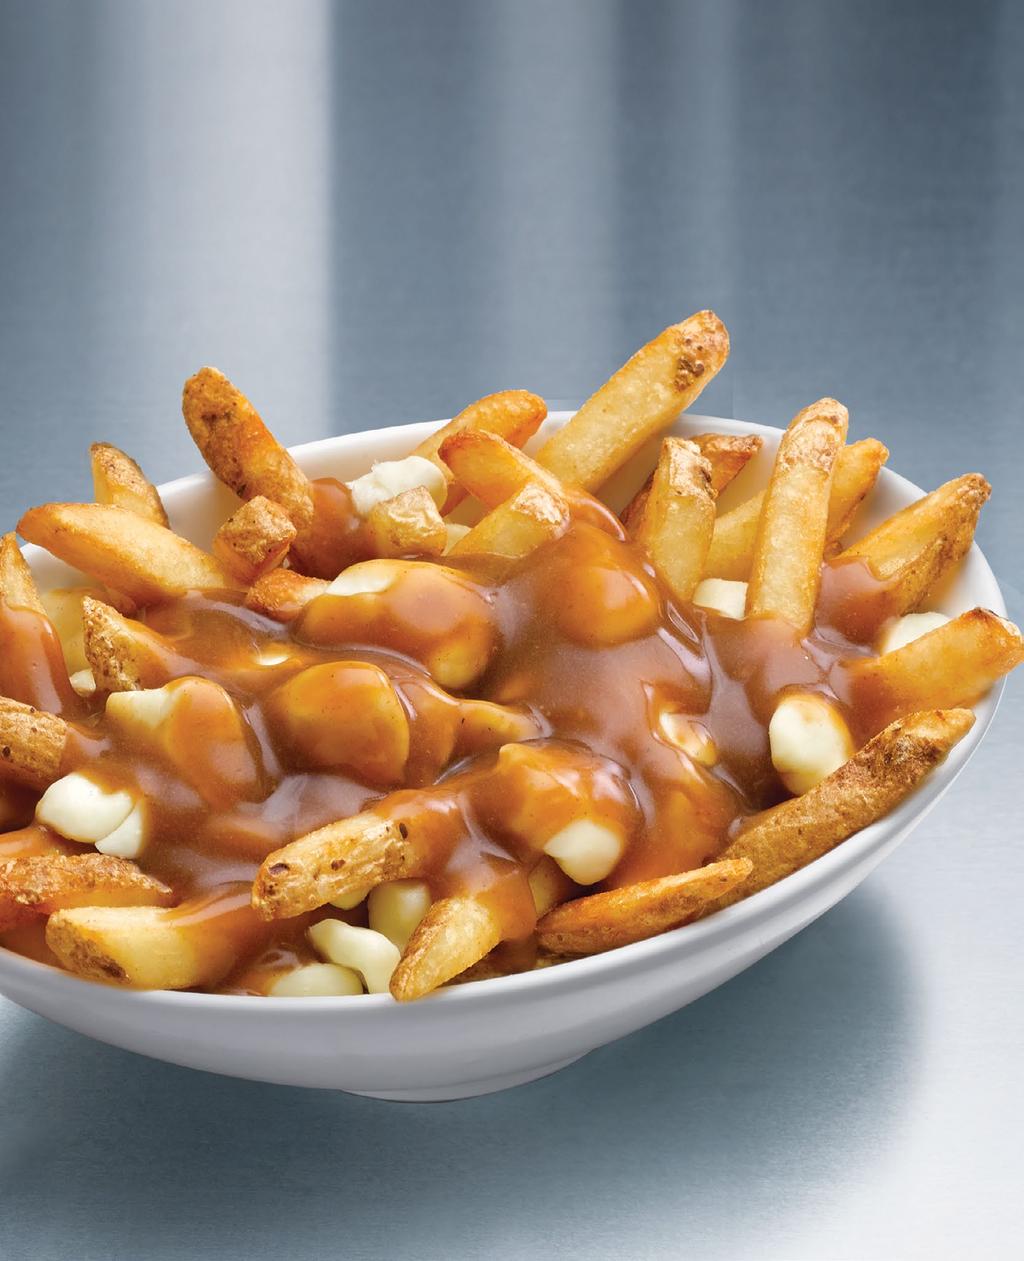 APPETIZERS North-of-the-Border Loaded Fries NOT JUST FOR CANADIANS ANYMORE This is a dish that makes Canada proud. Fries, cheese curds and gravy. About as simple and good as it gets.